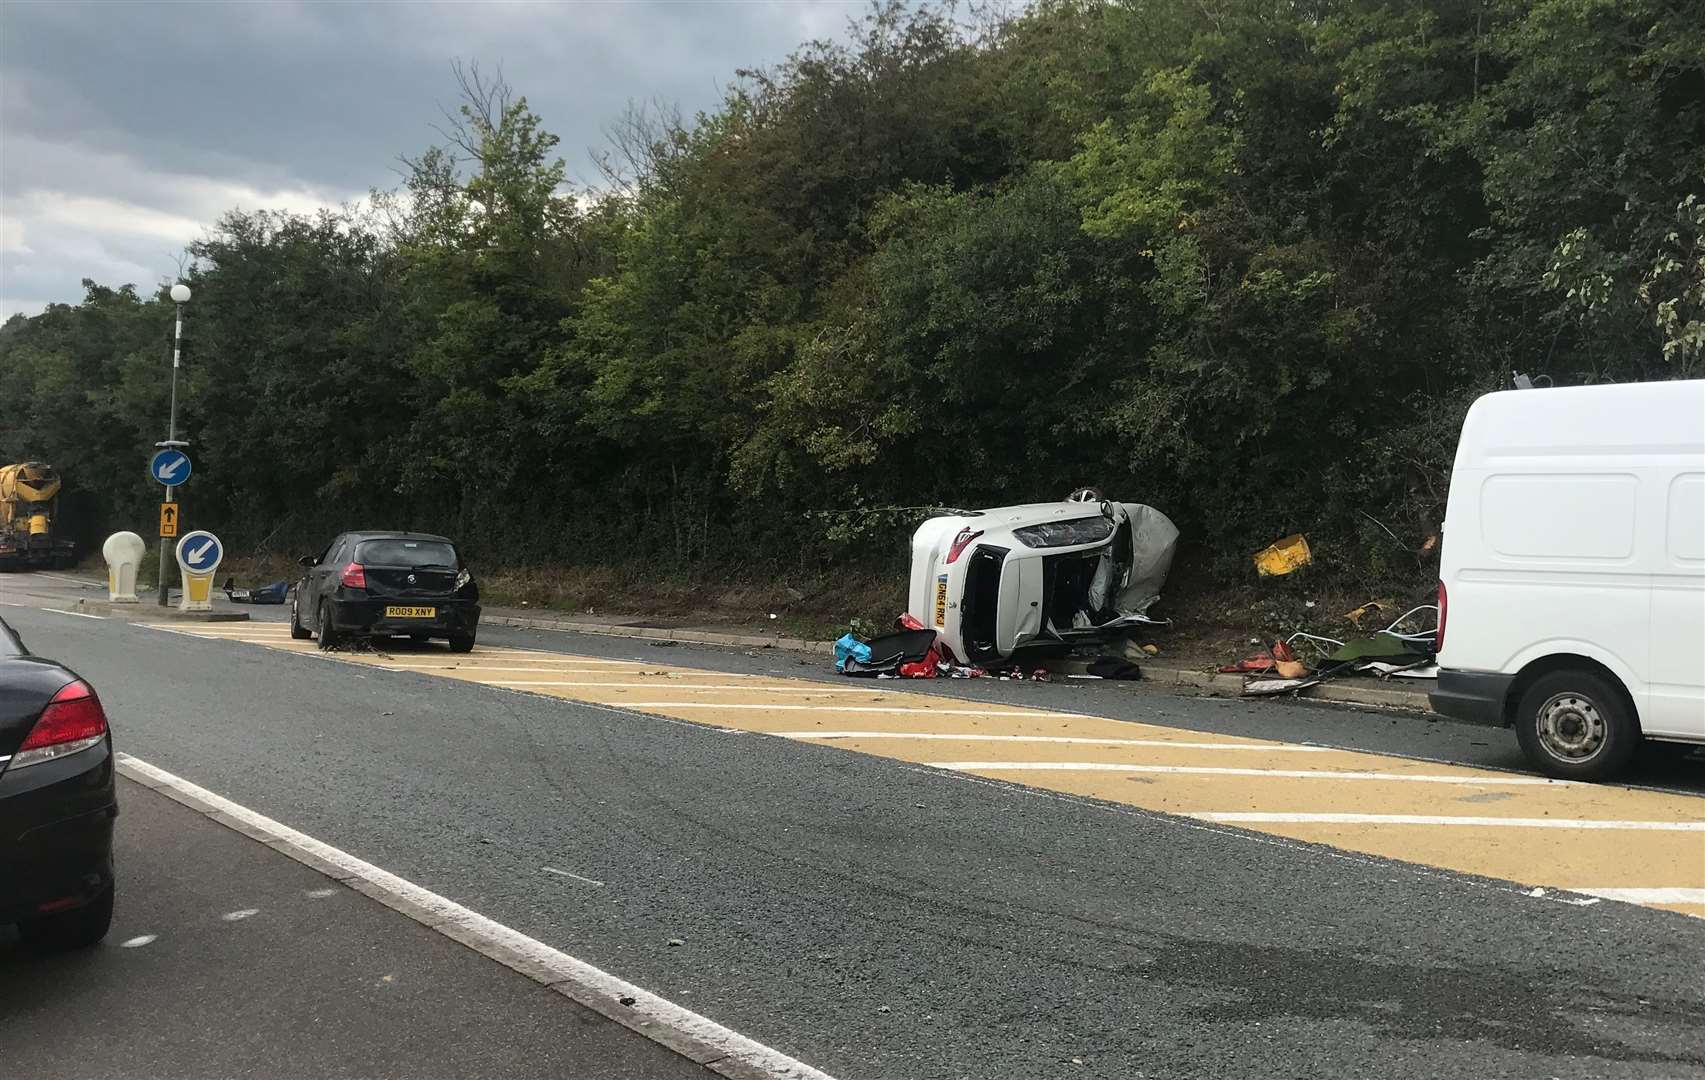 Firefighters were called to rescue one person trapped inside a car and cut the roof off the vehicle following the crash in Cuxton